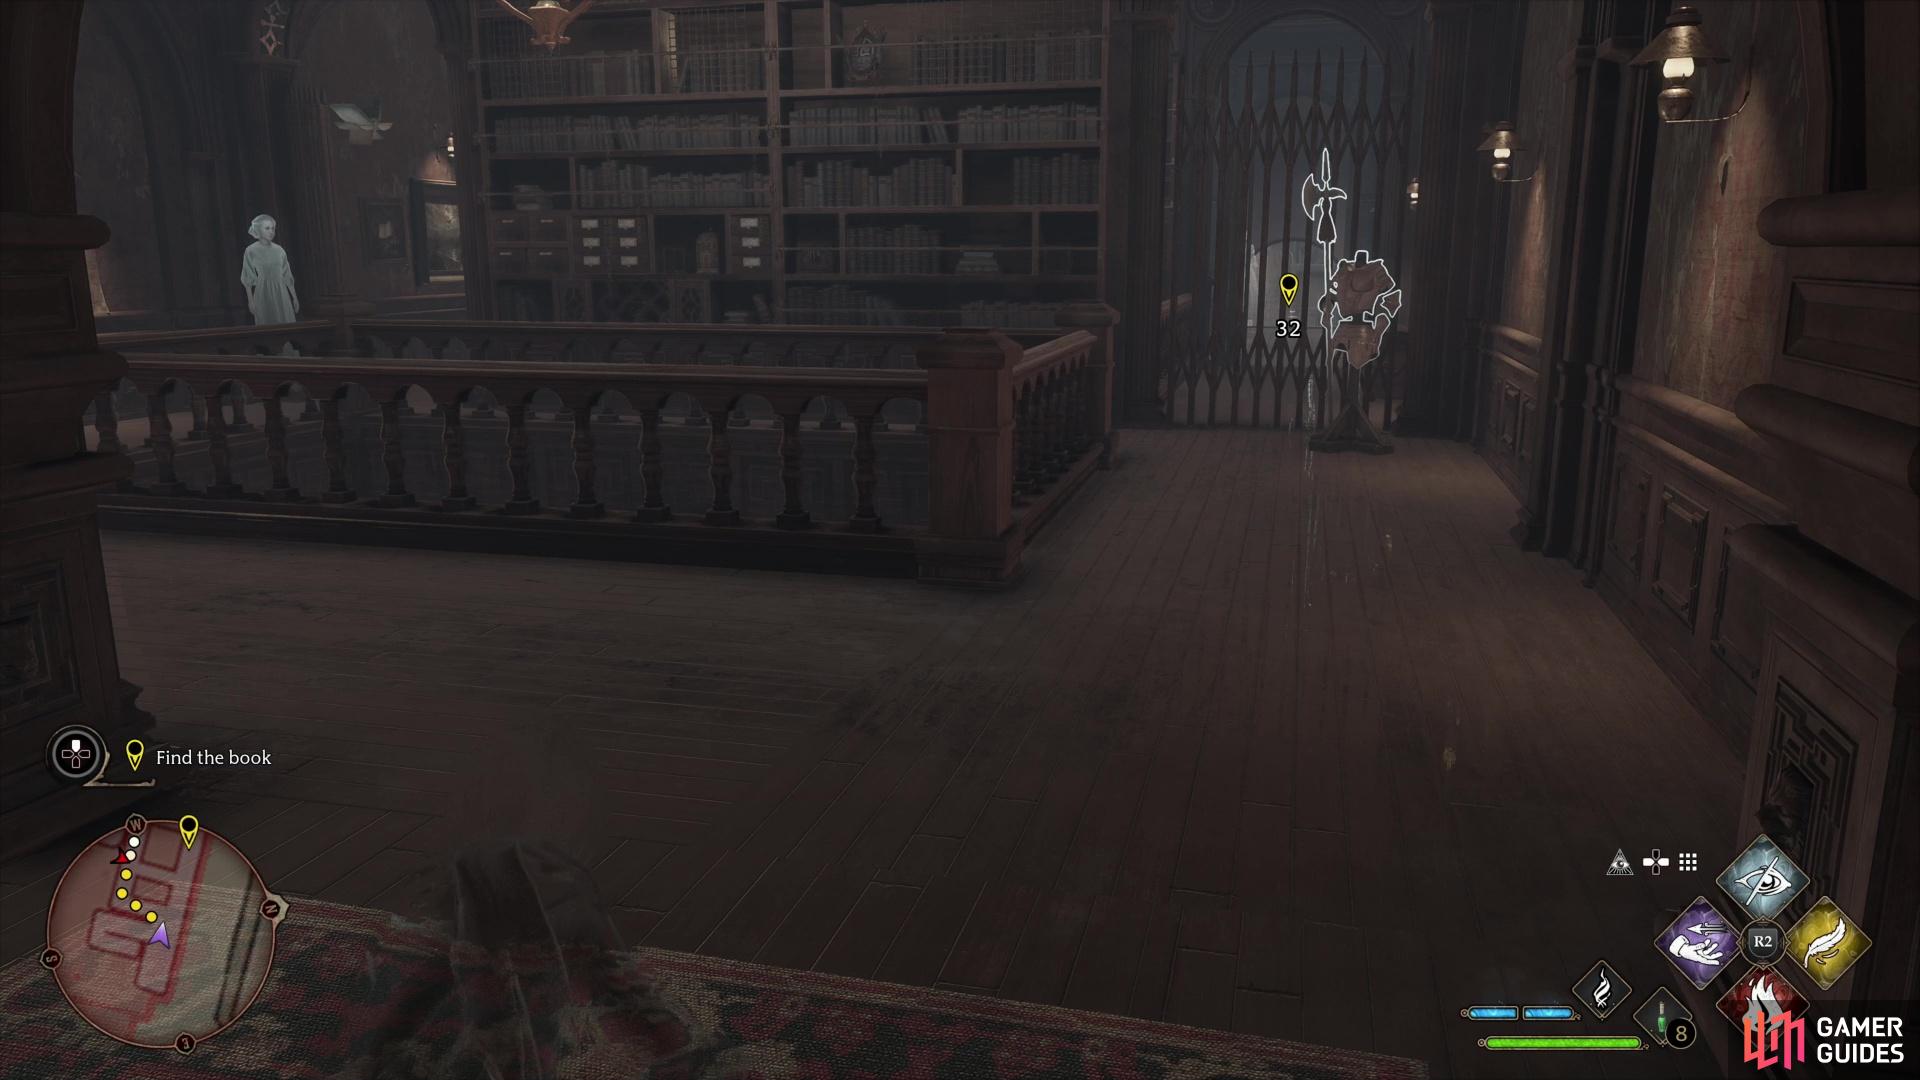 After getting through the gate and going down some stairs, you'll find a ghost blocking your path.